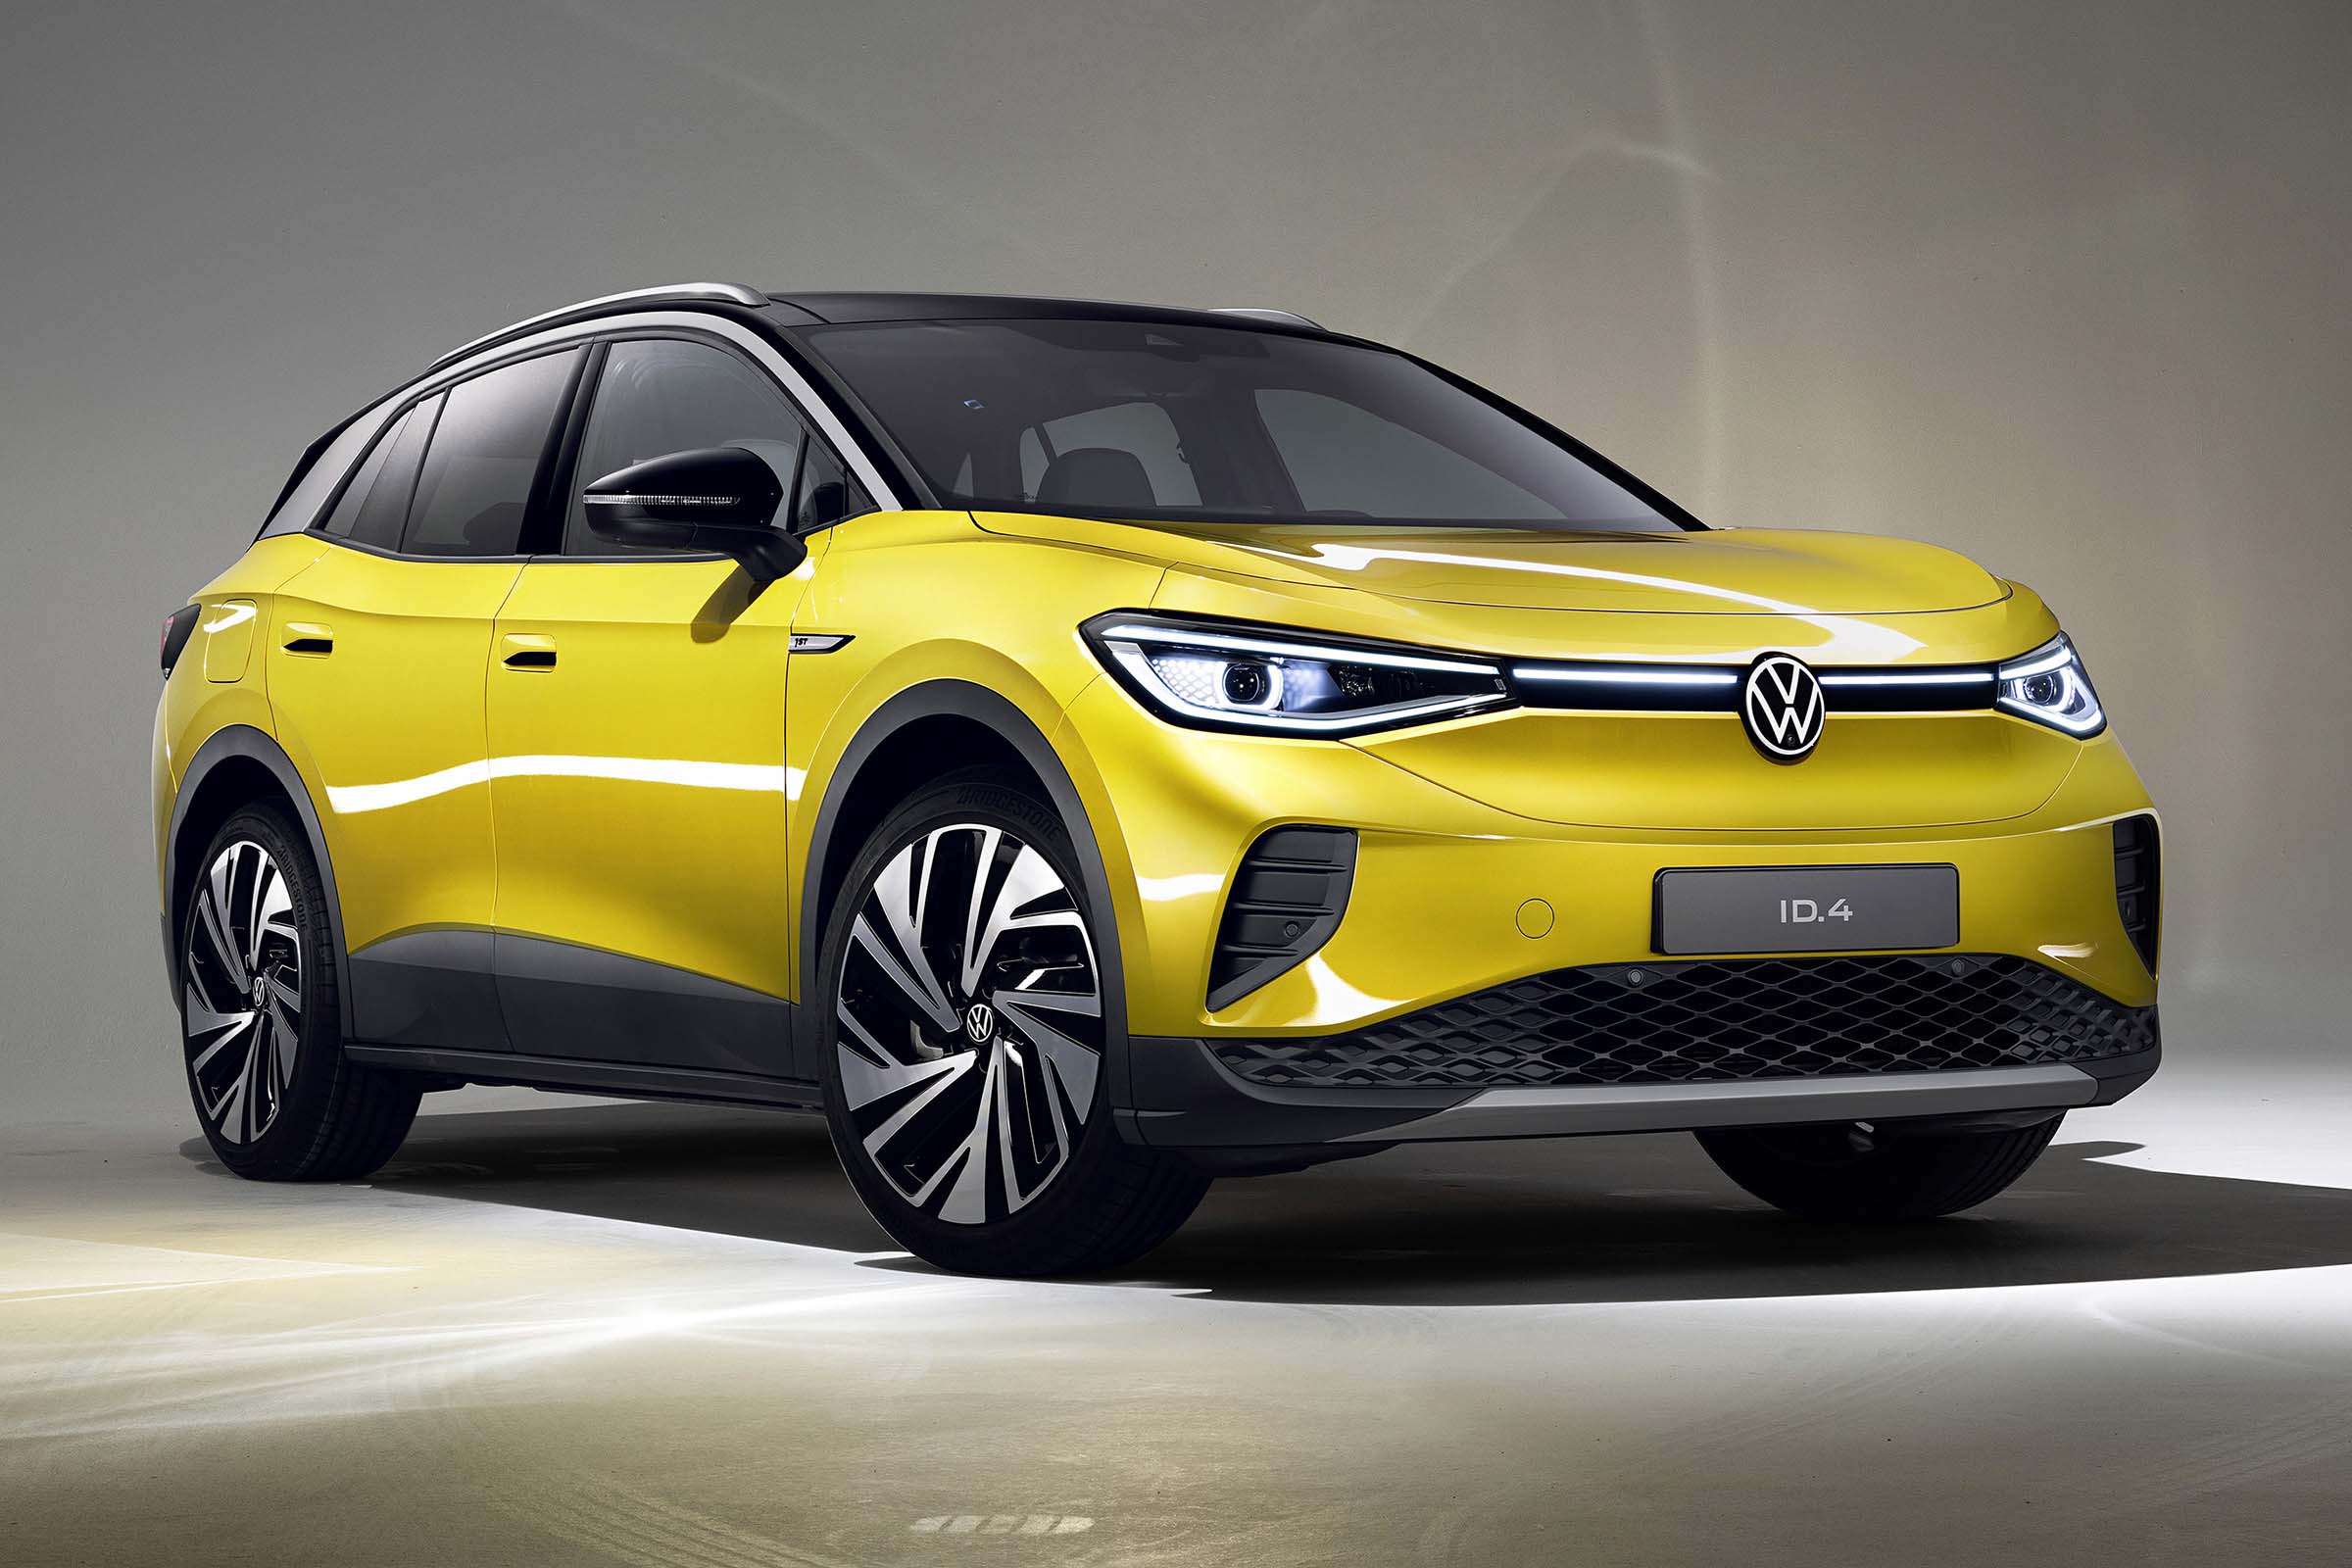 Volkswagen ID.4 electric SUV 2021 specs, pictures and onsale date